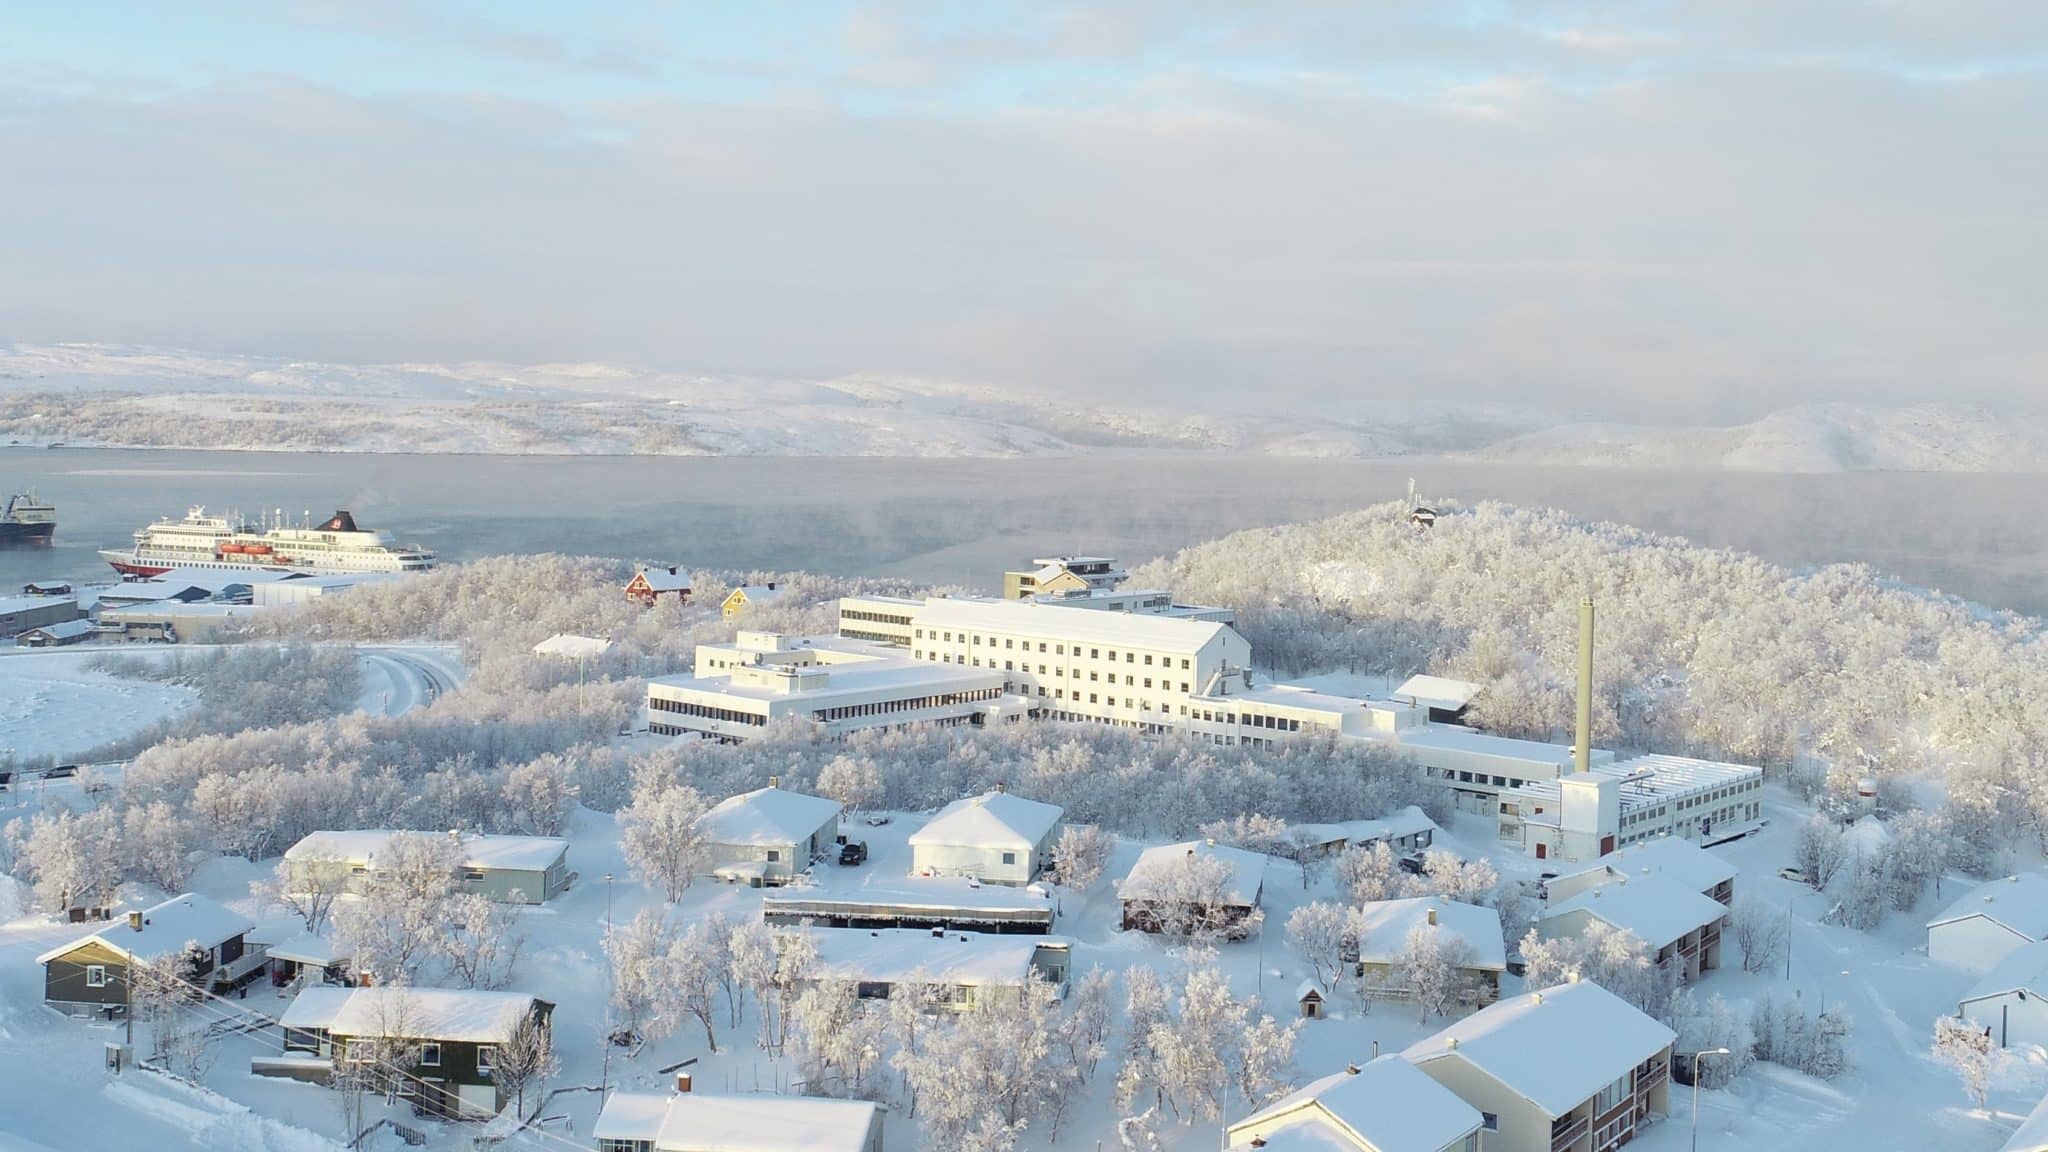 Bright winter day, aerial view of the Nothing Hill campus´ white buildings, sea and gently sloping hills in the background.